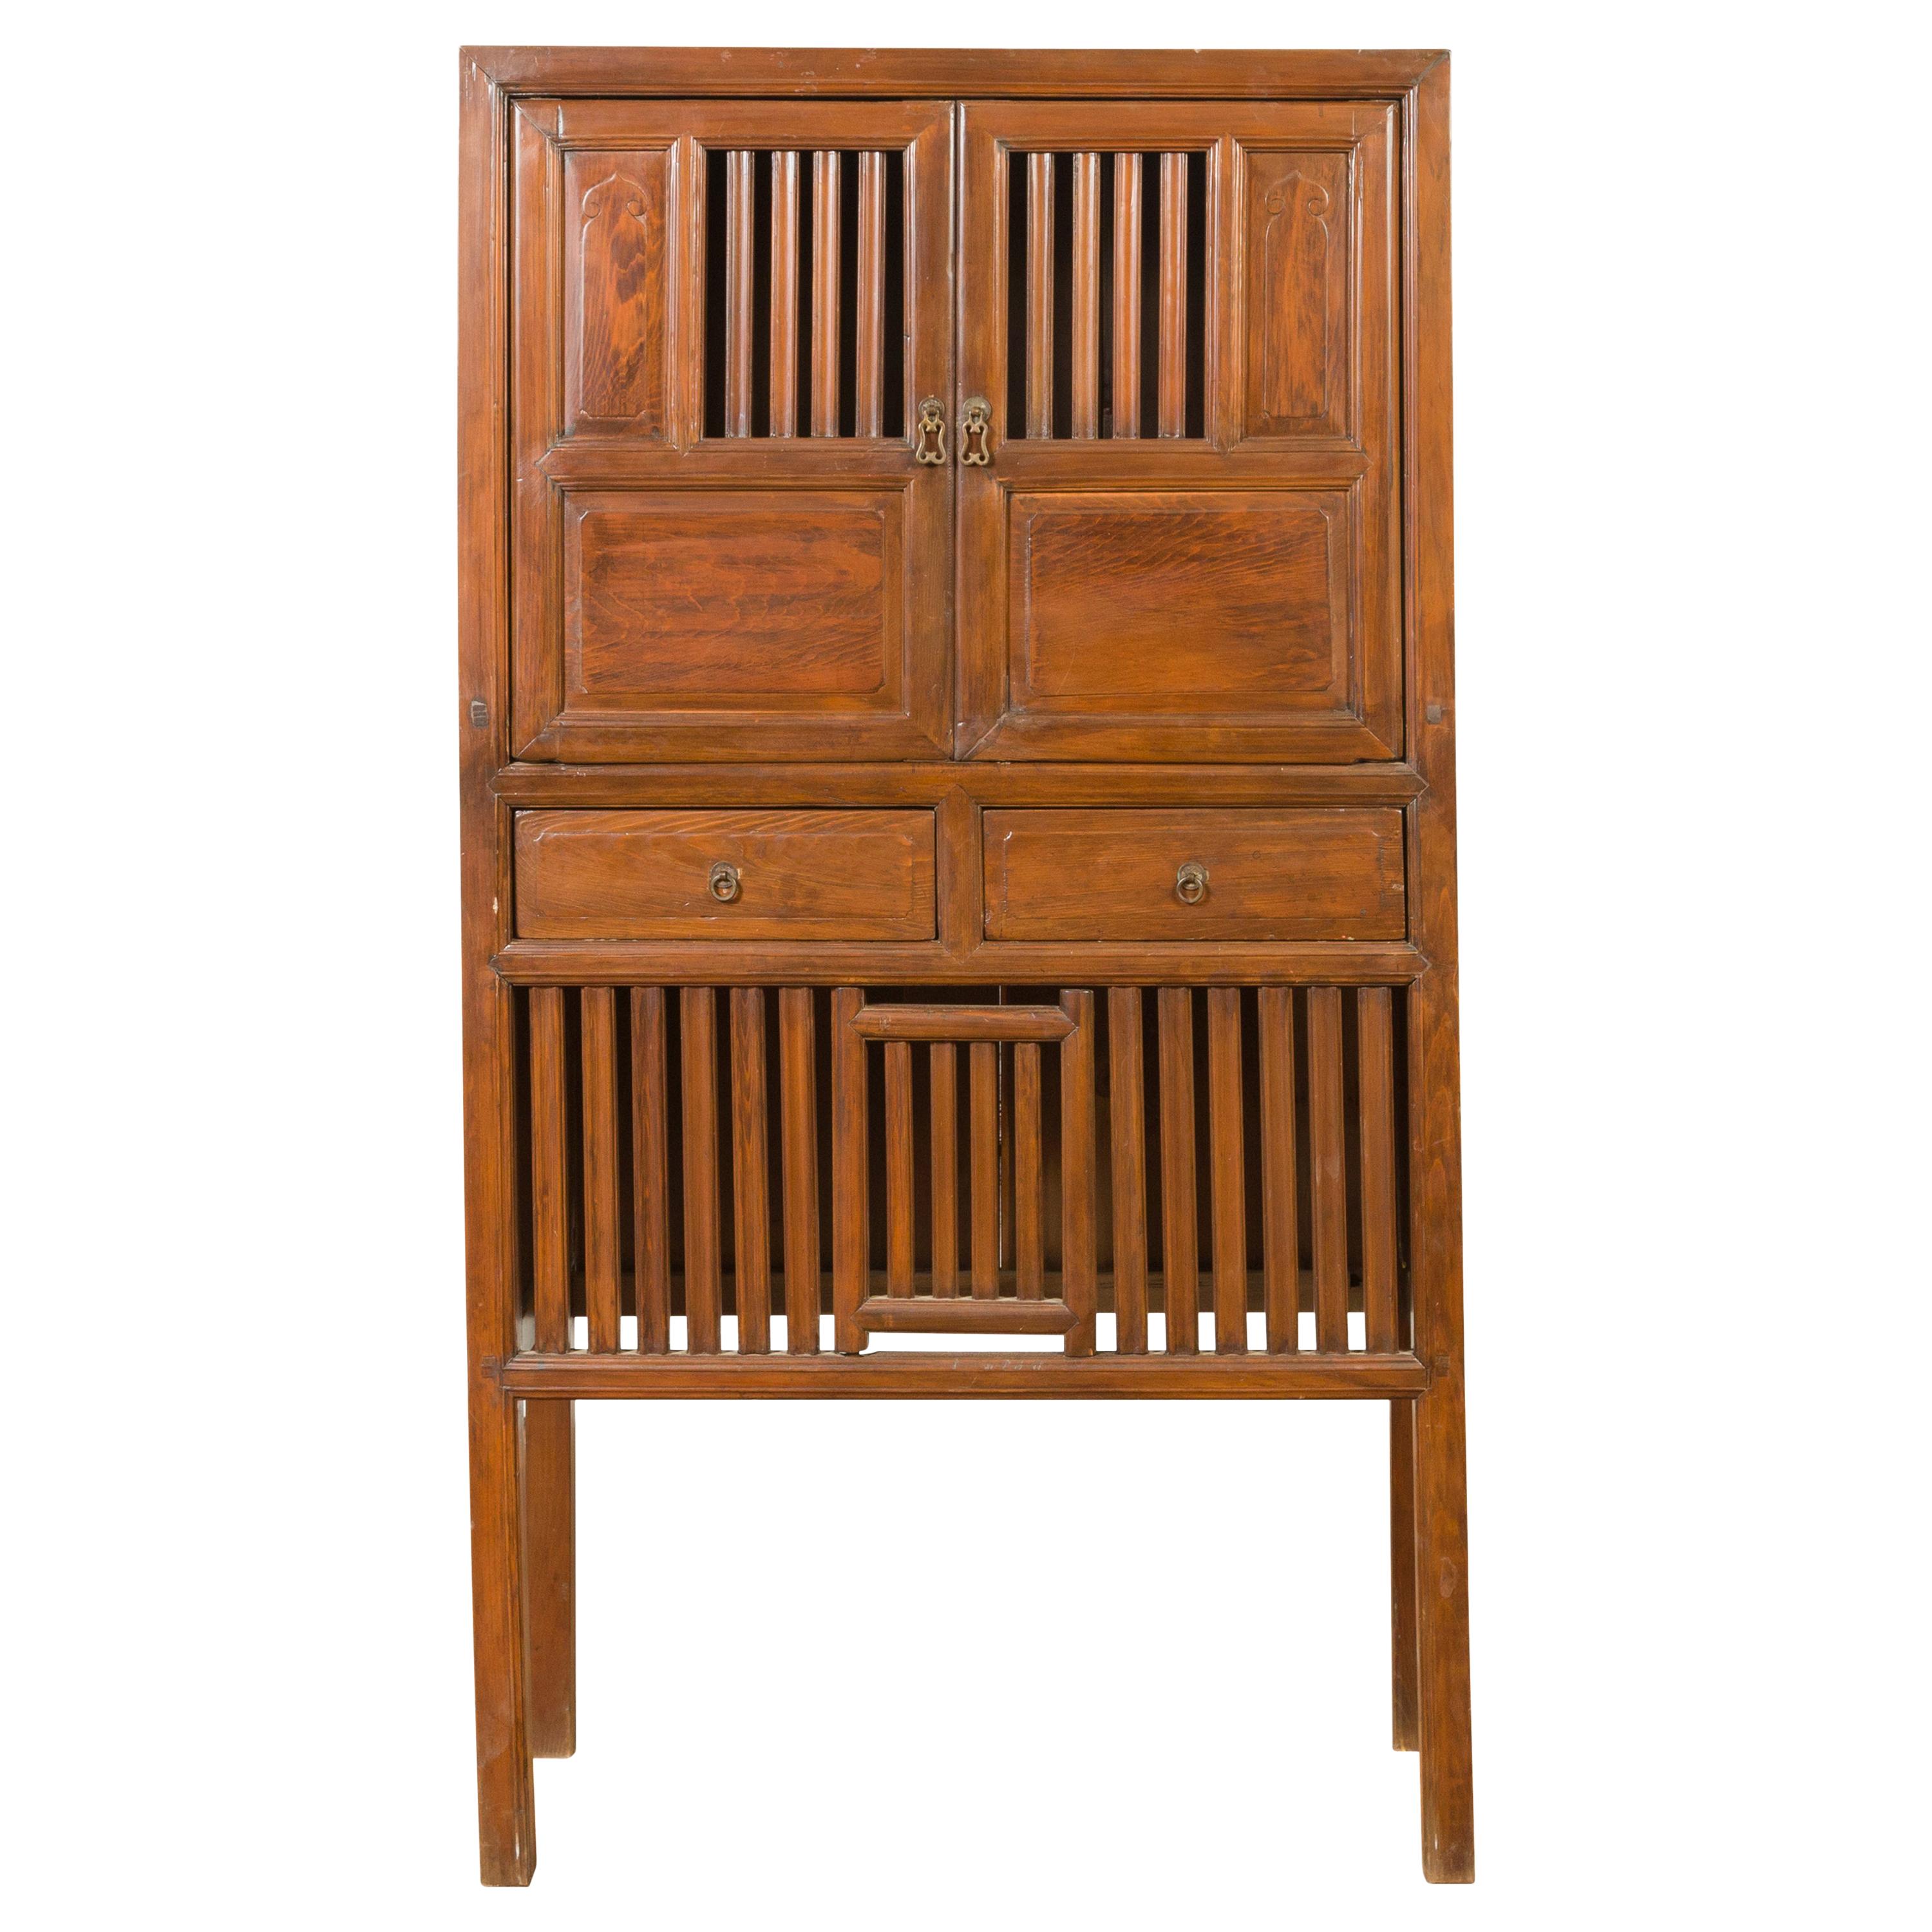 Chinese Vintage Cabinet with Fretwork Design, Doors and Drawers